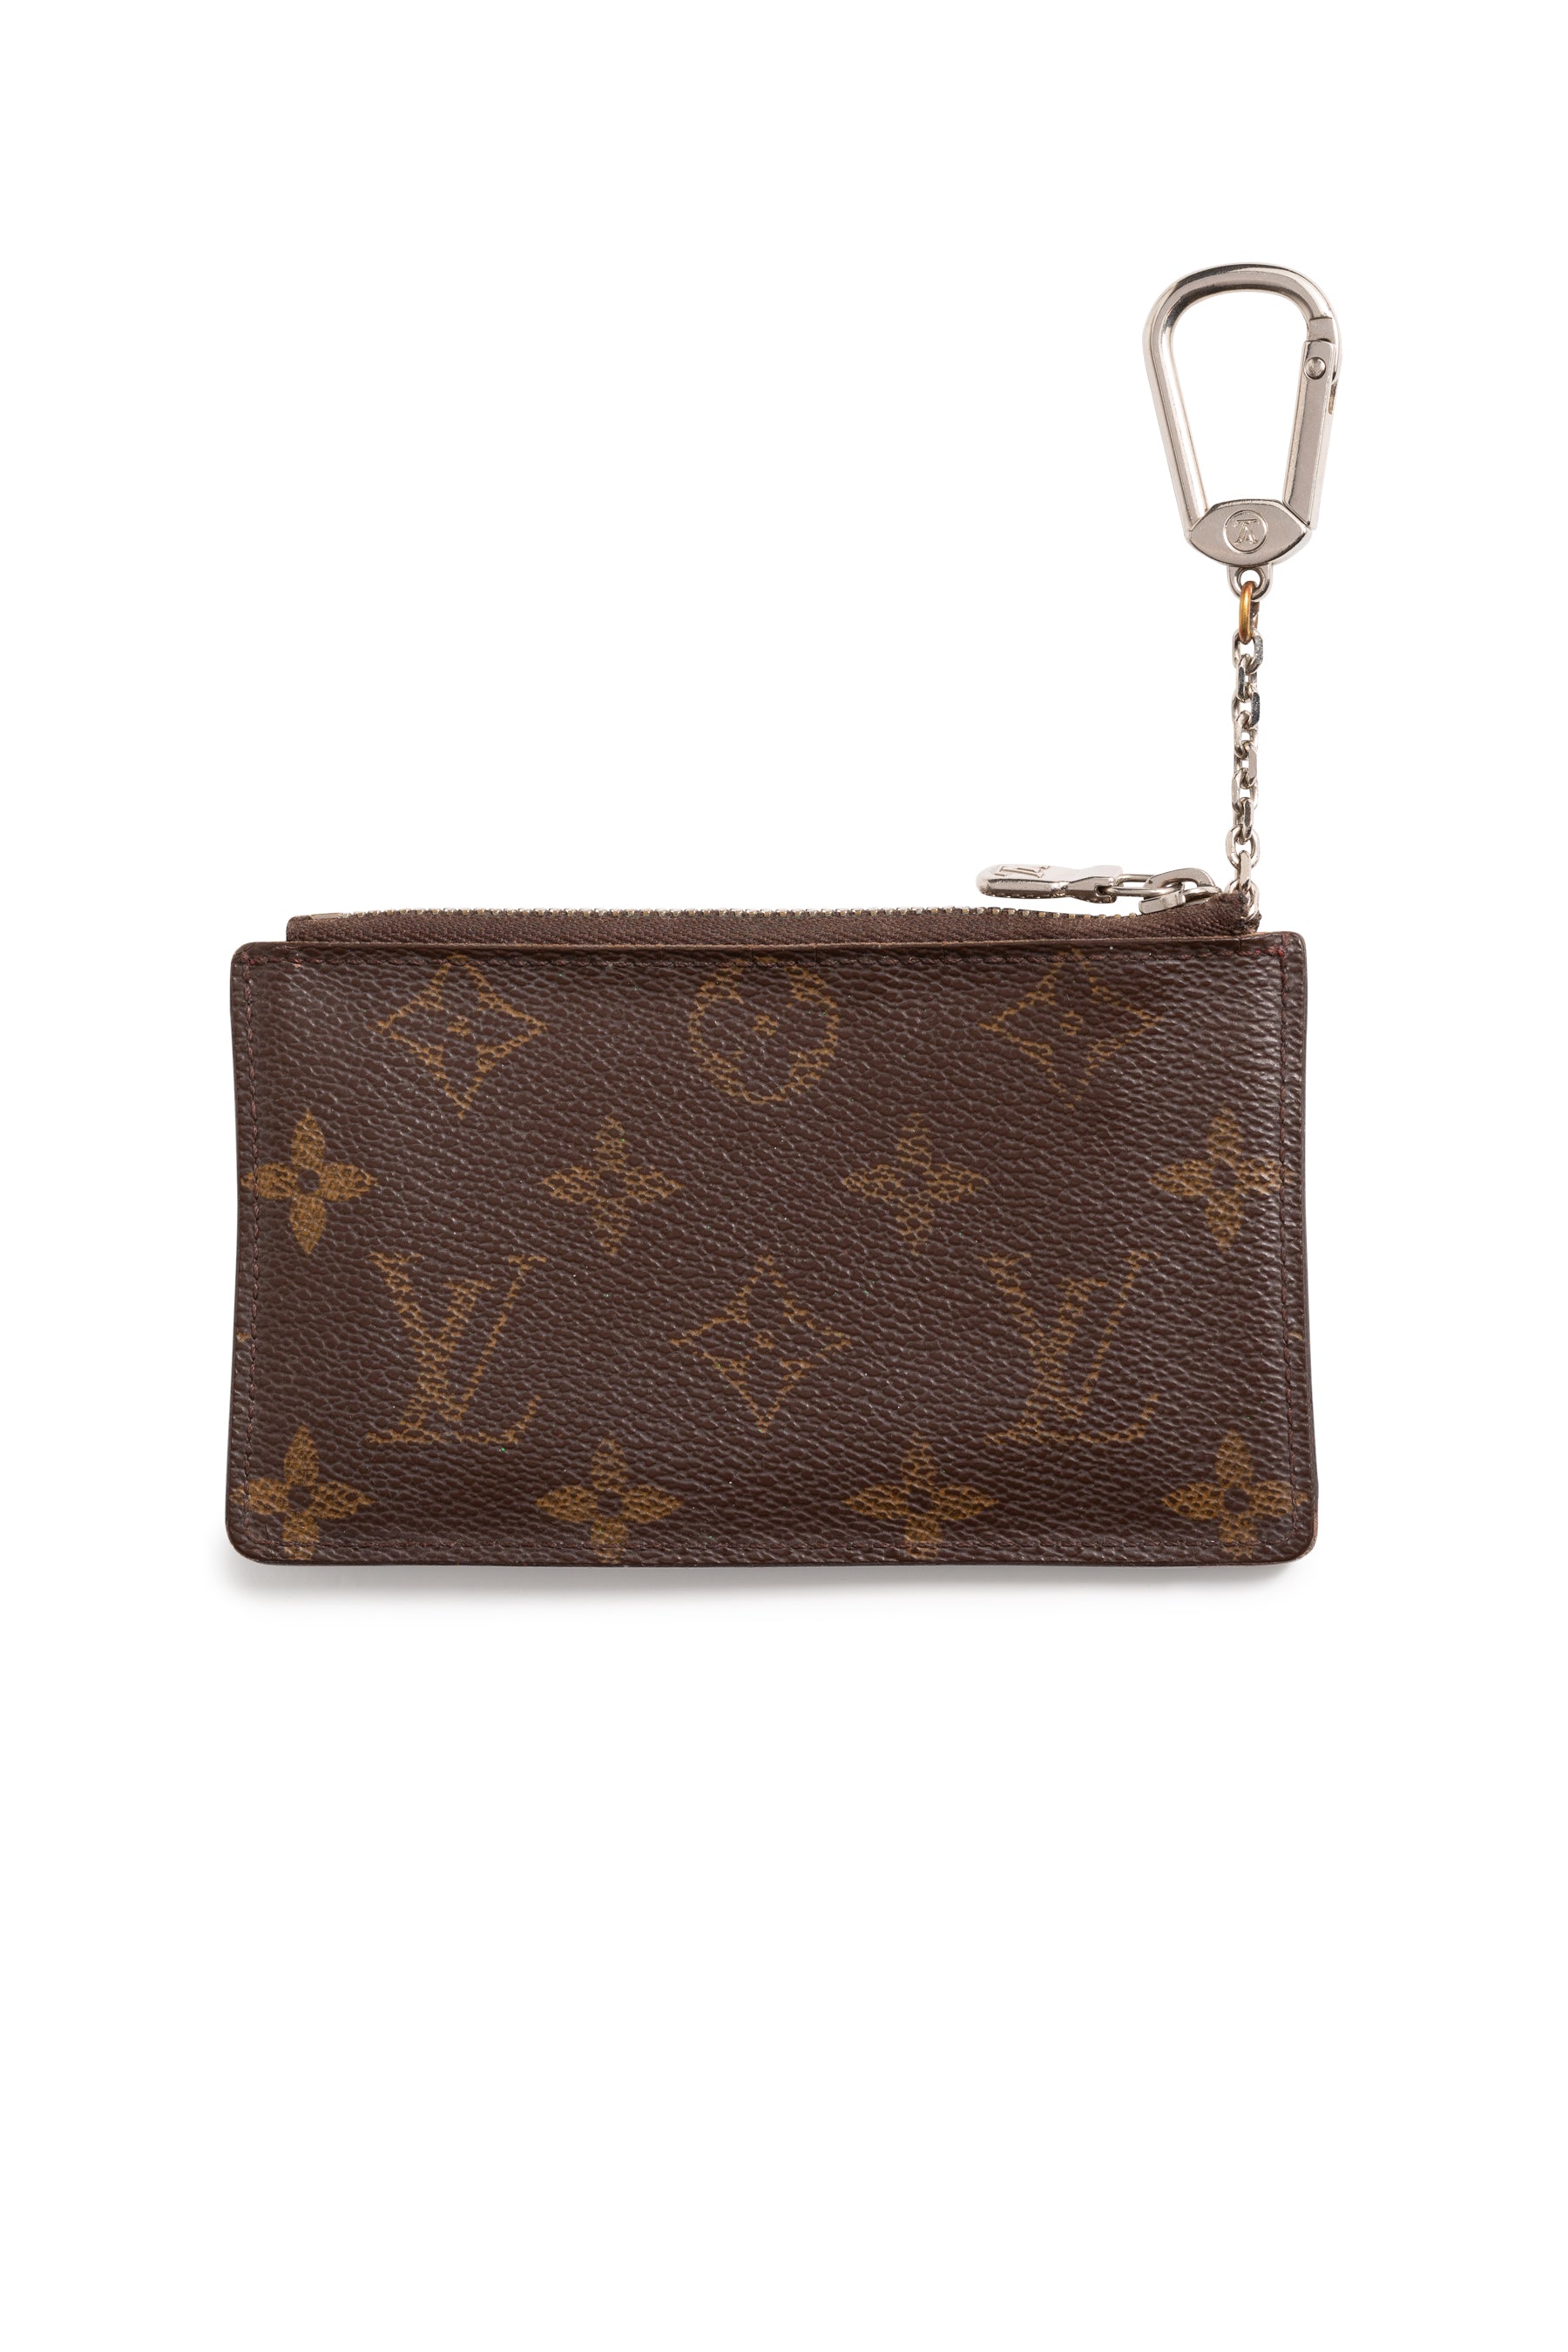 Louis Vuitton Brown Limited Edition Mg Cruise Key Chain Pouch 315